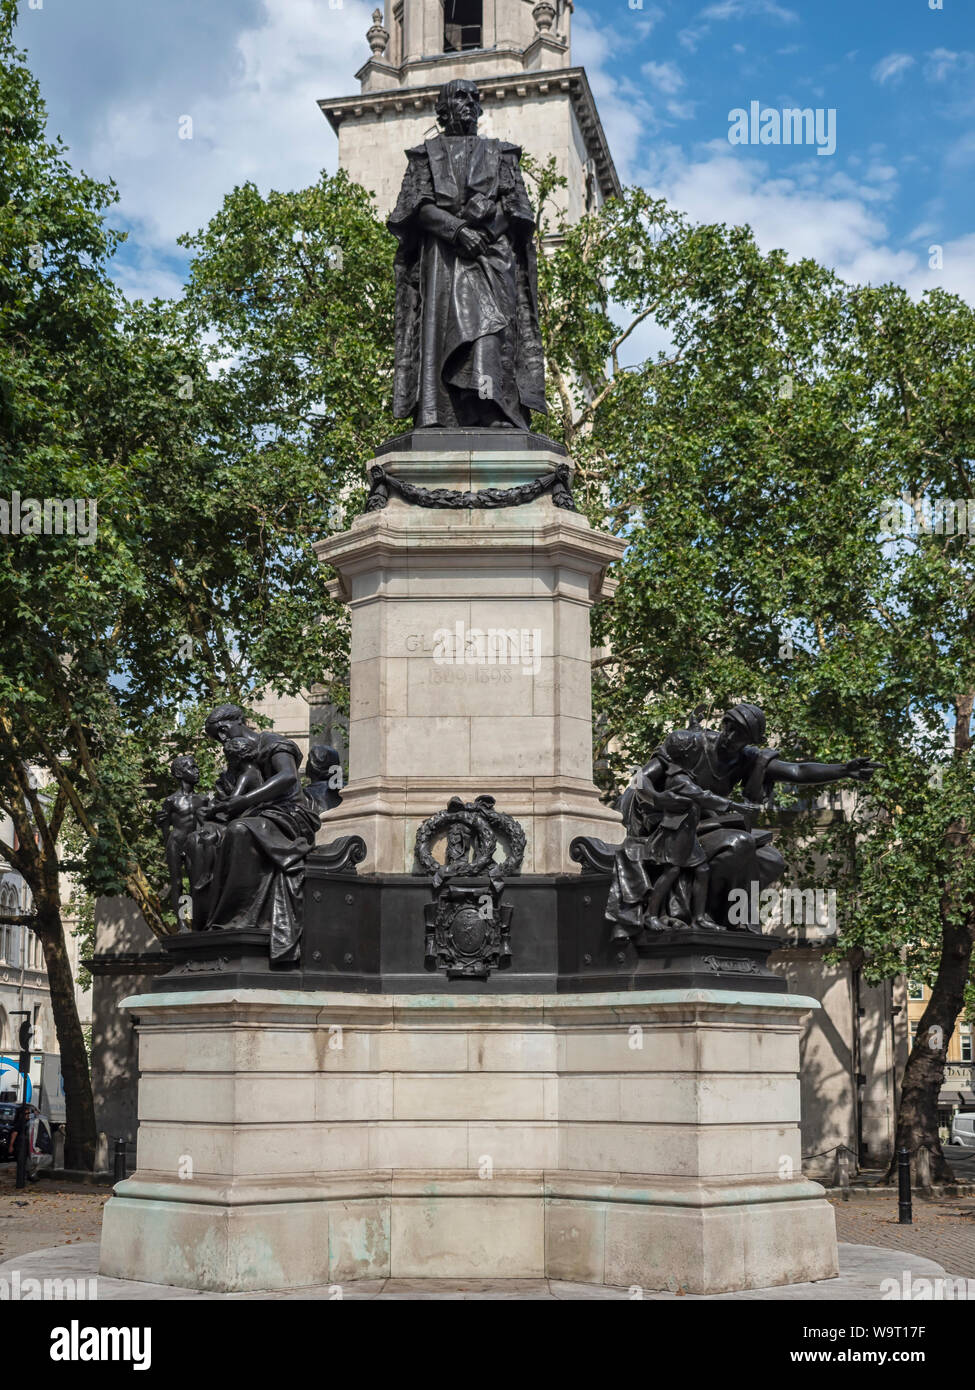 LONDON, UK - JULY 26, 2018:  Statue of William Ewart Gladstone outside St. Clement Danes Church in the Strand Stock Photo